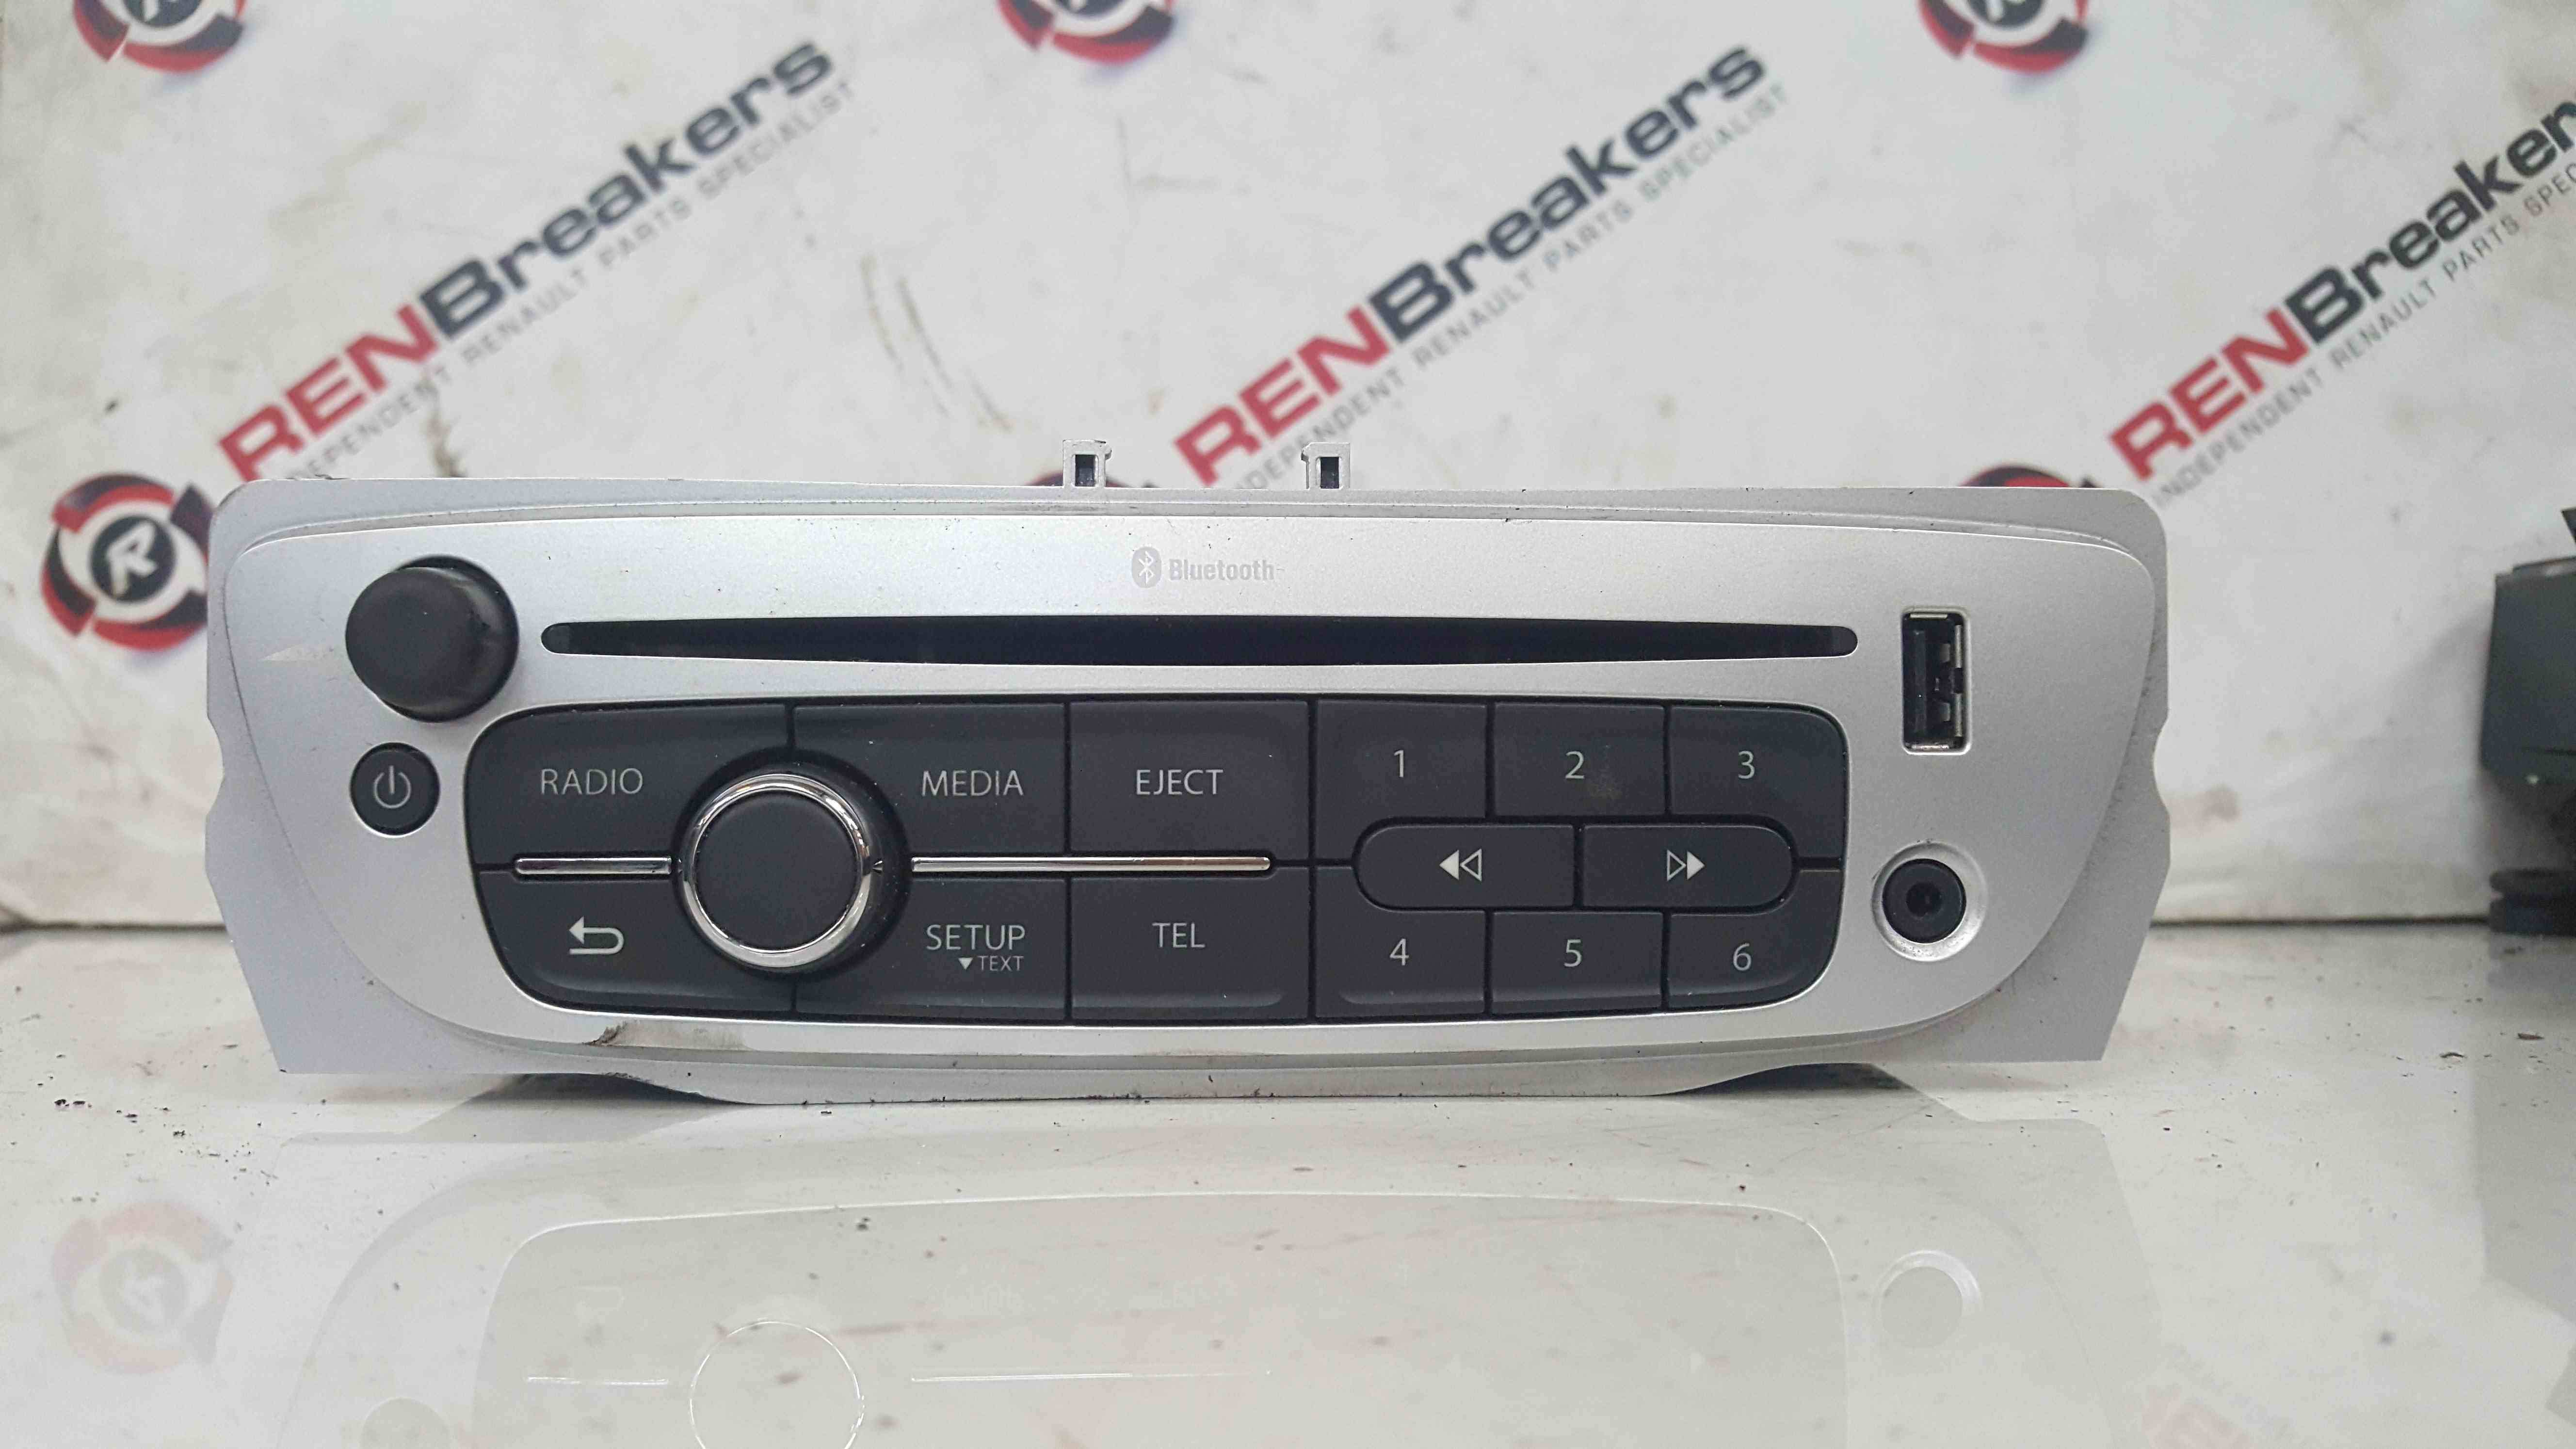 Renault Trafic CD player with AUX IN, Renault car stereo + radio code and  keys